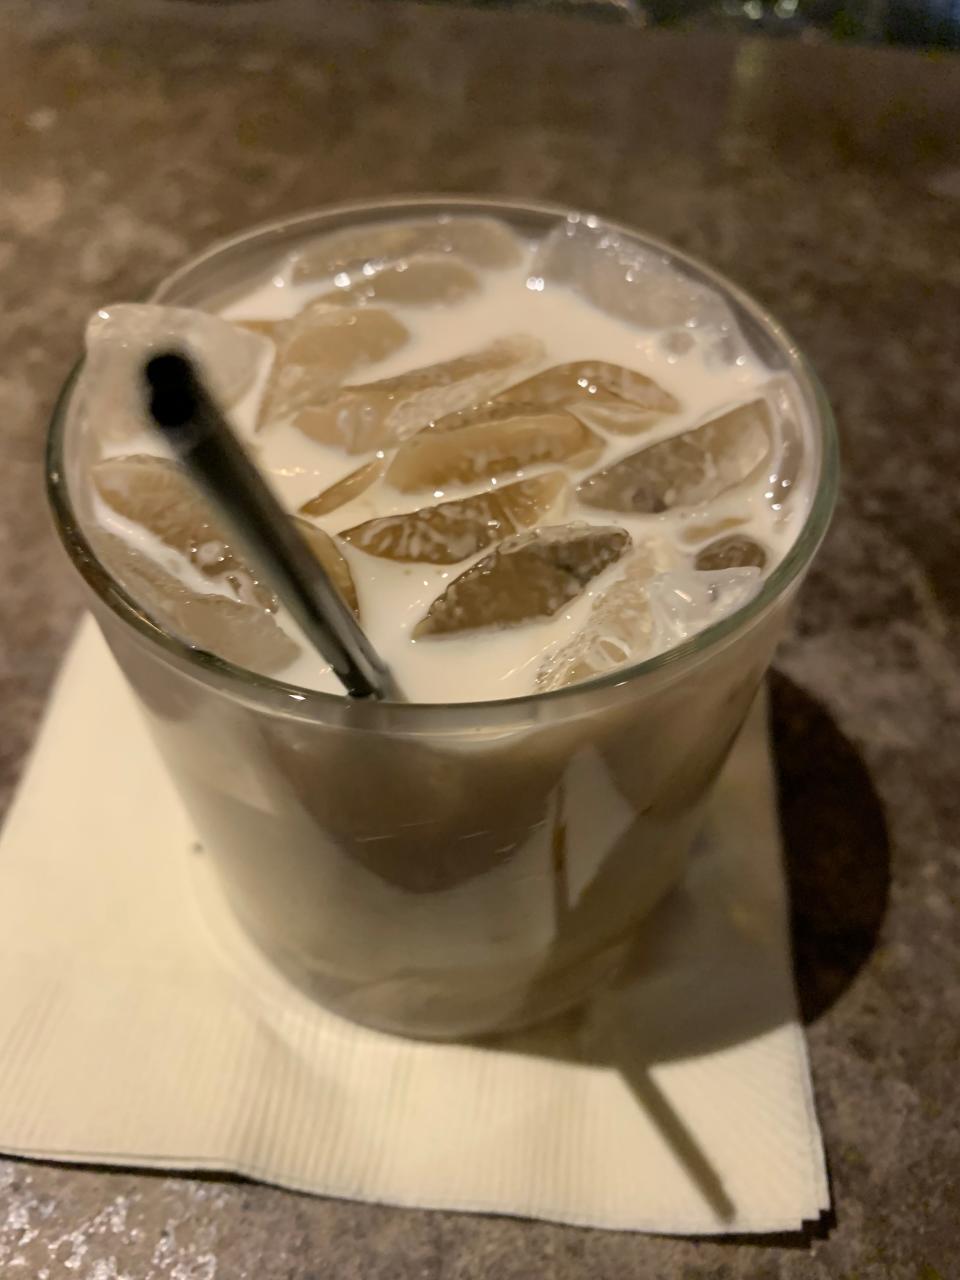 A peanut butter white Russian at Litchfield's.